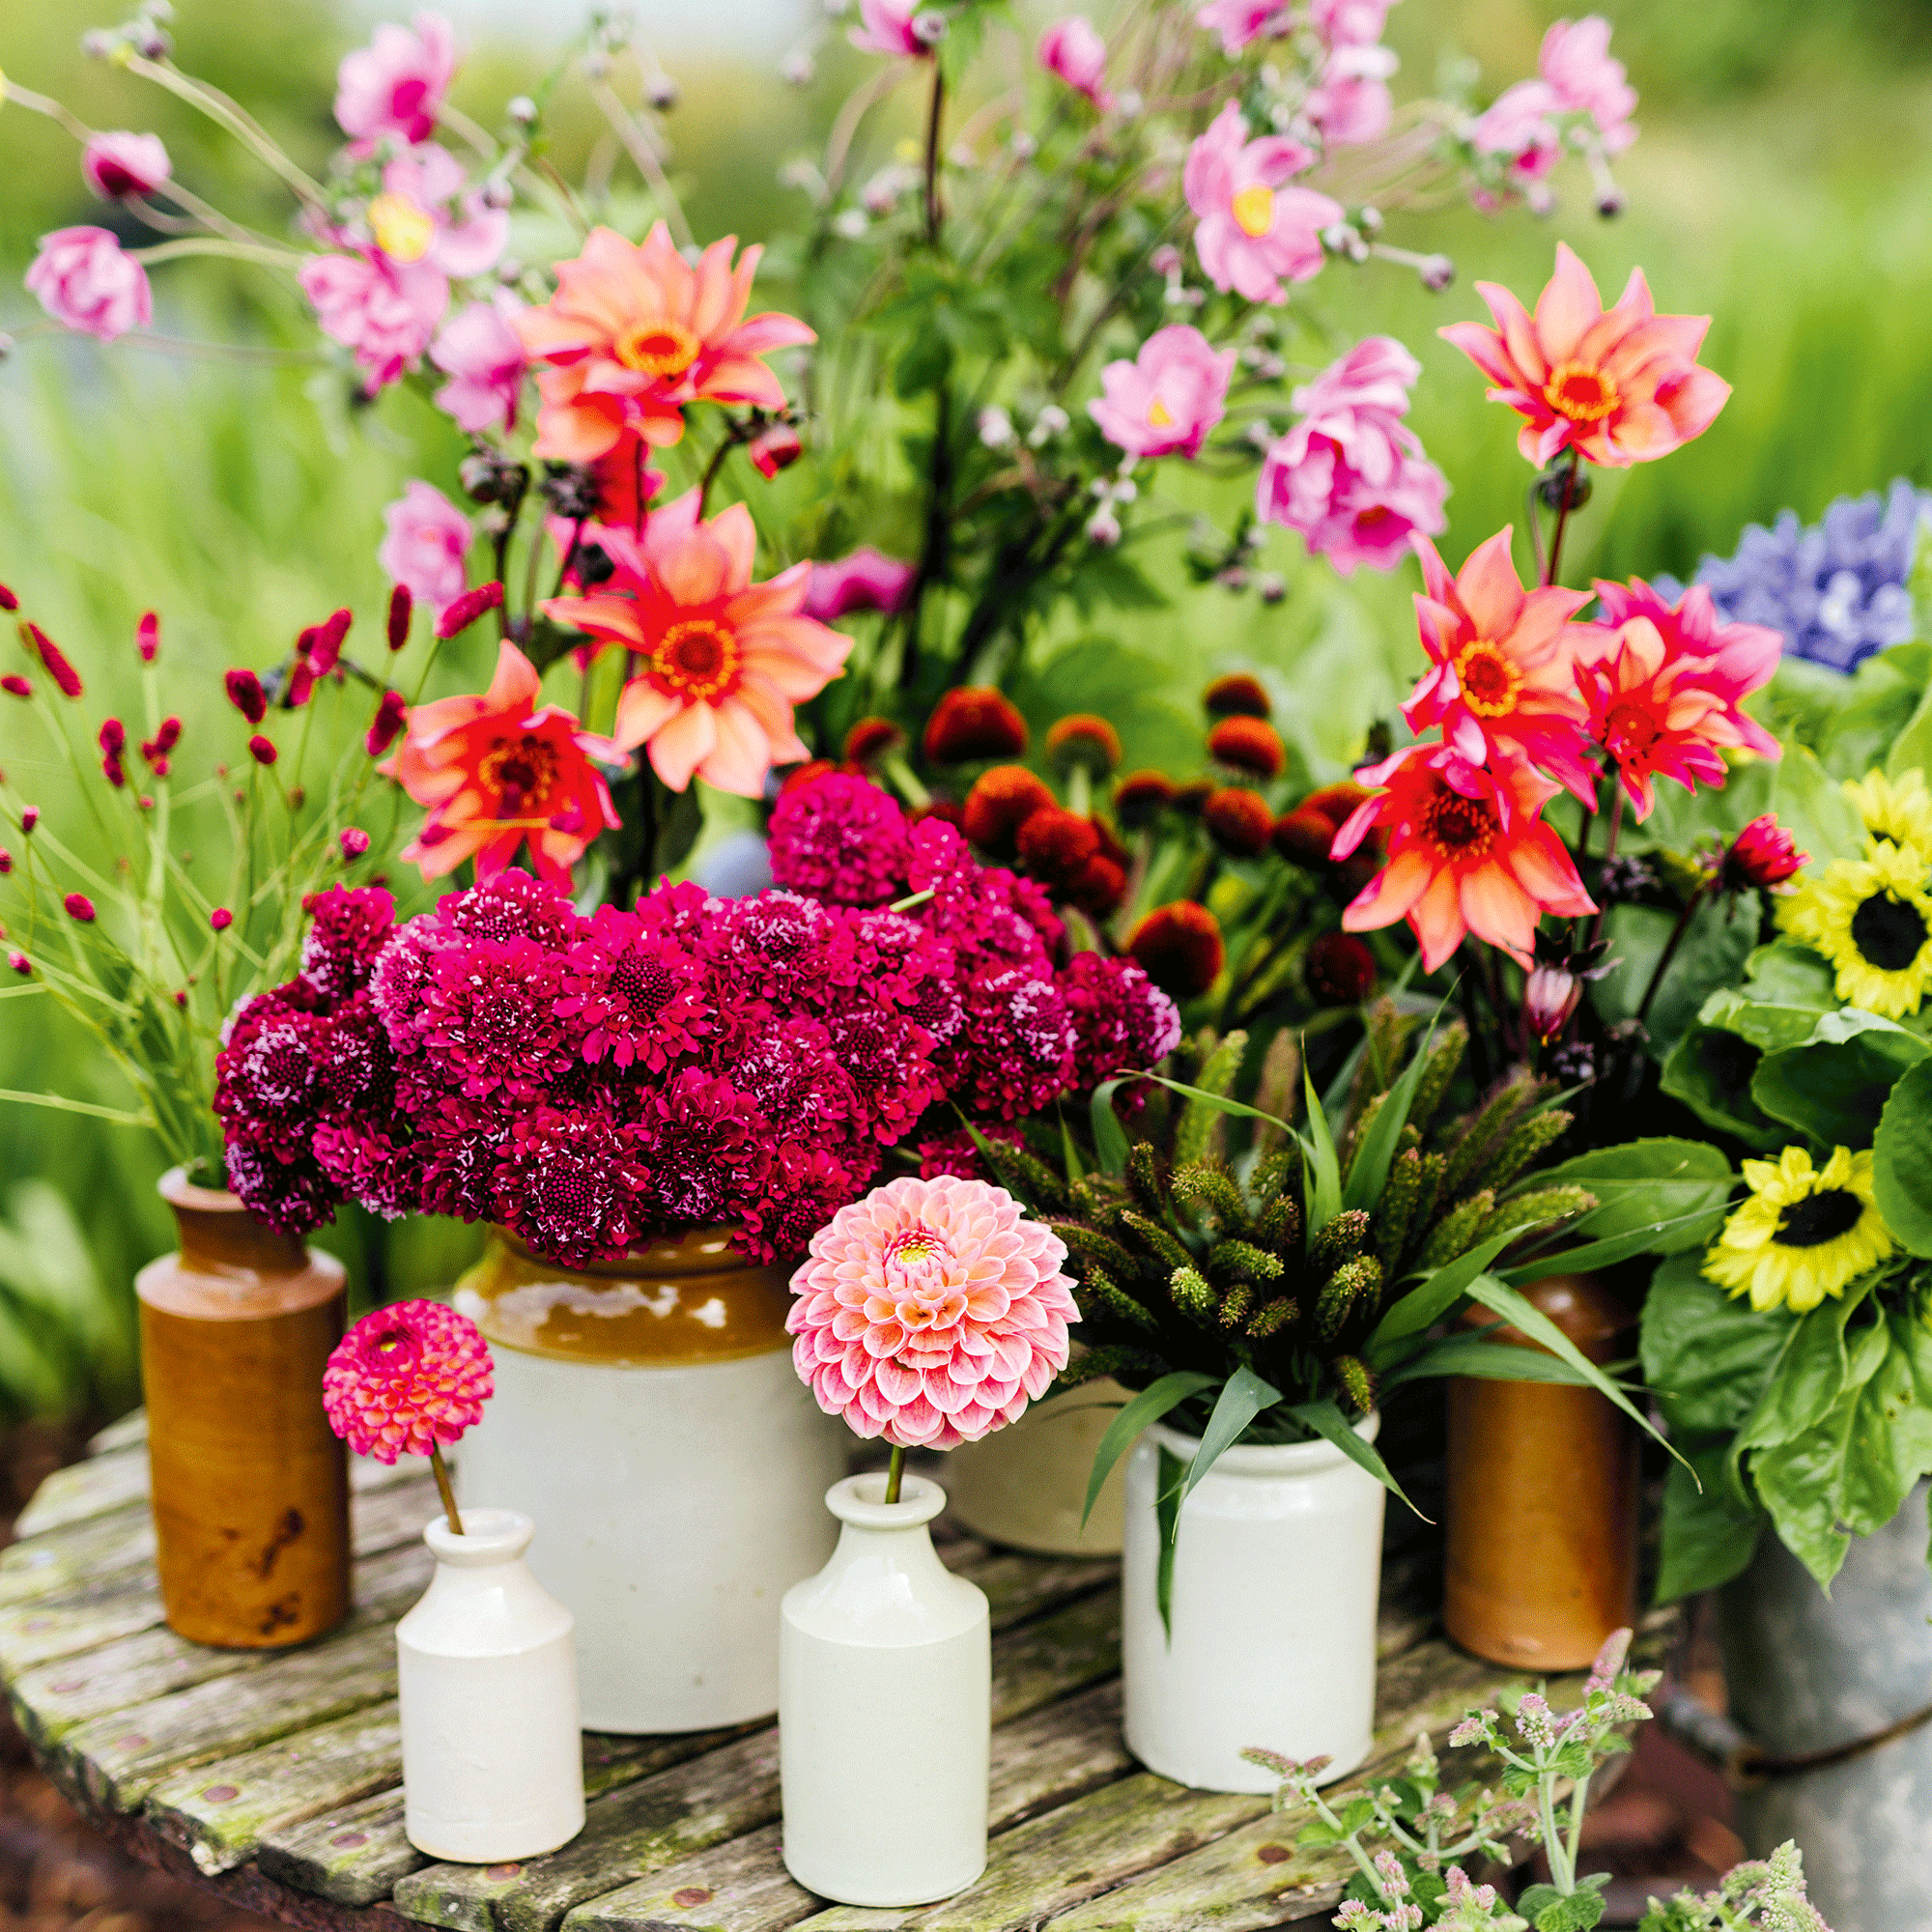 Flowers and pink dahlias arranged in vases